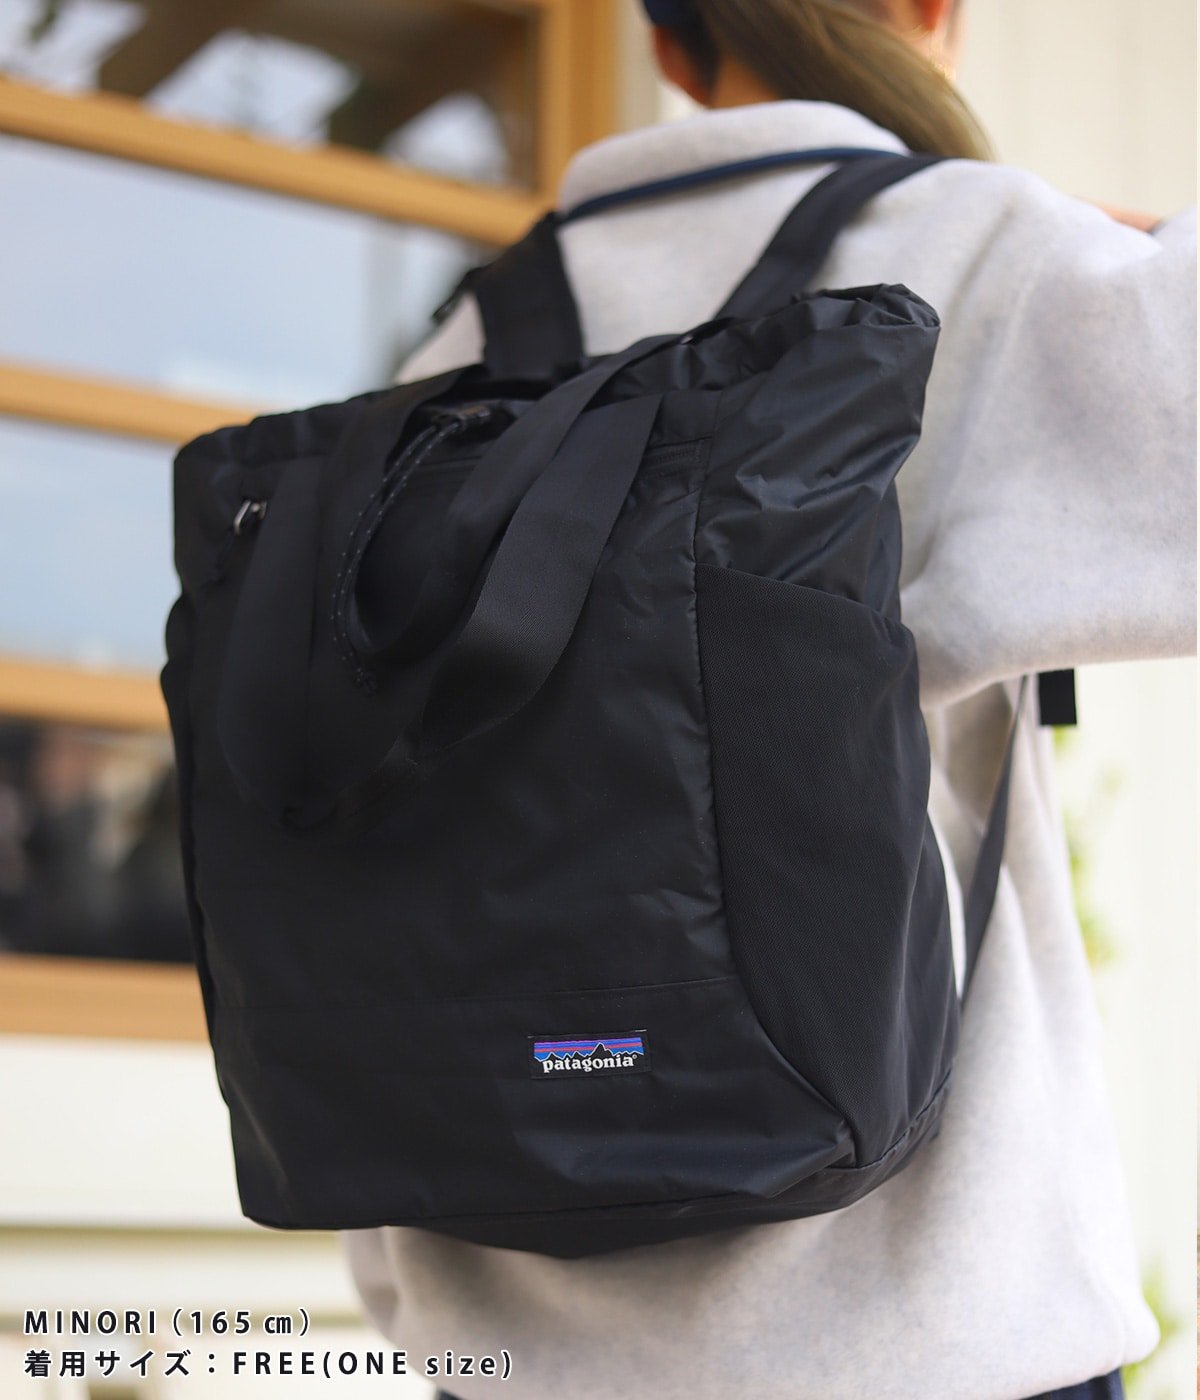 Ultralight Black Hole Tote Pack -CUBL-